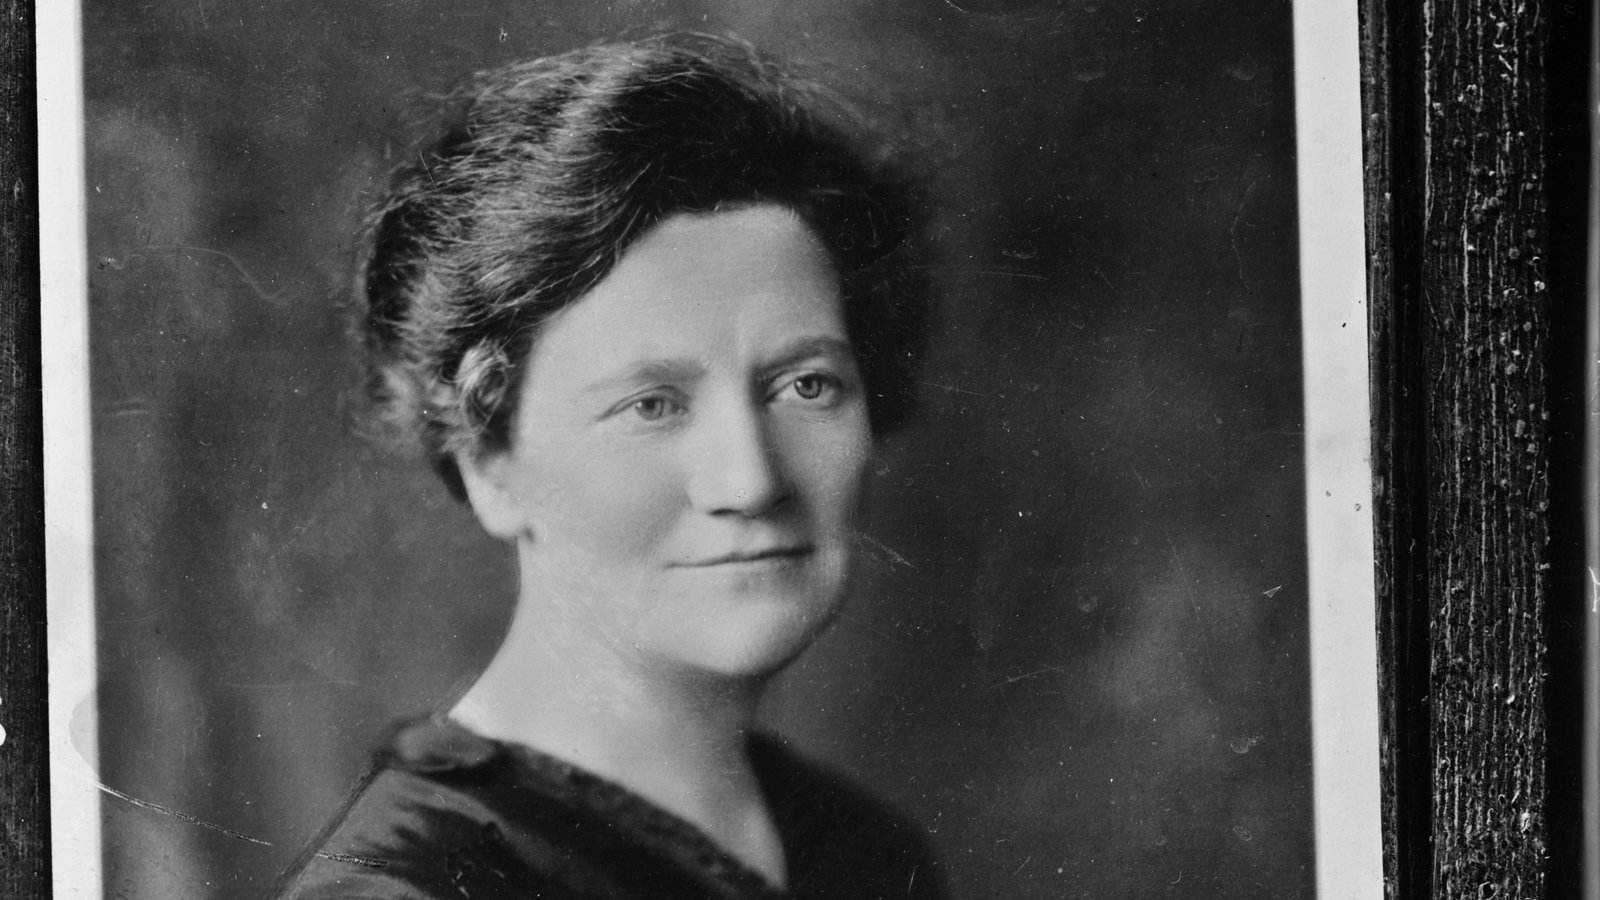 Image - Mary MacSwiney, one of just two women to win a seat in the 1922 election. Image courtesy of the National Library of Ireland